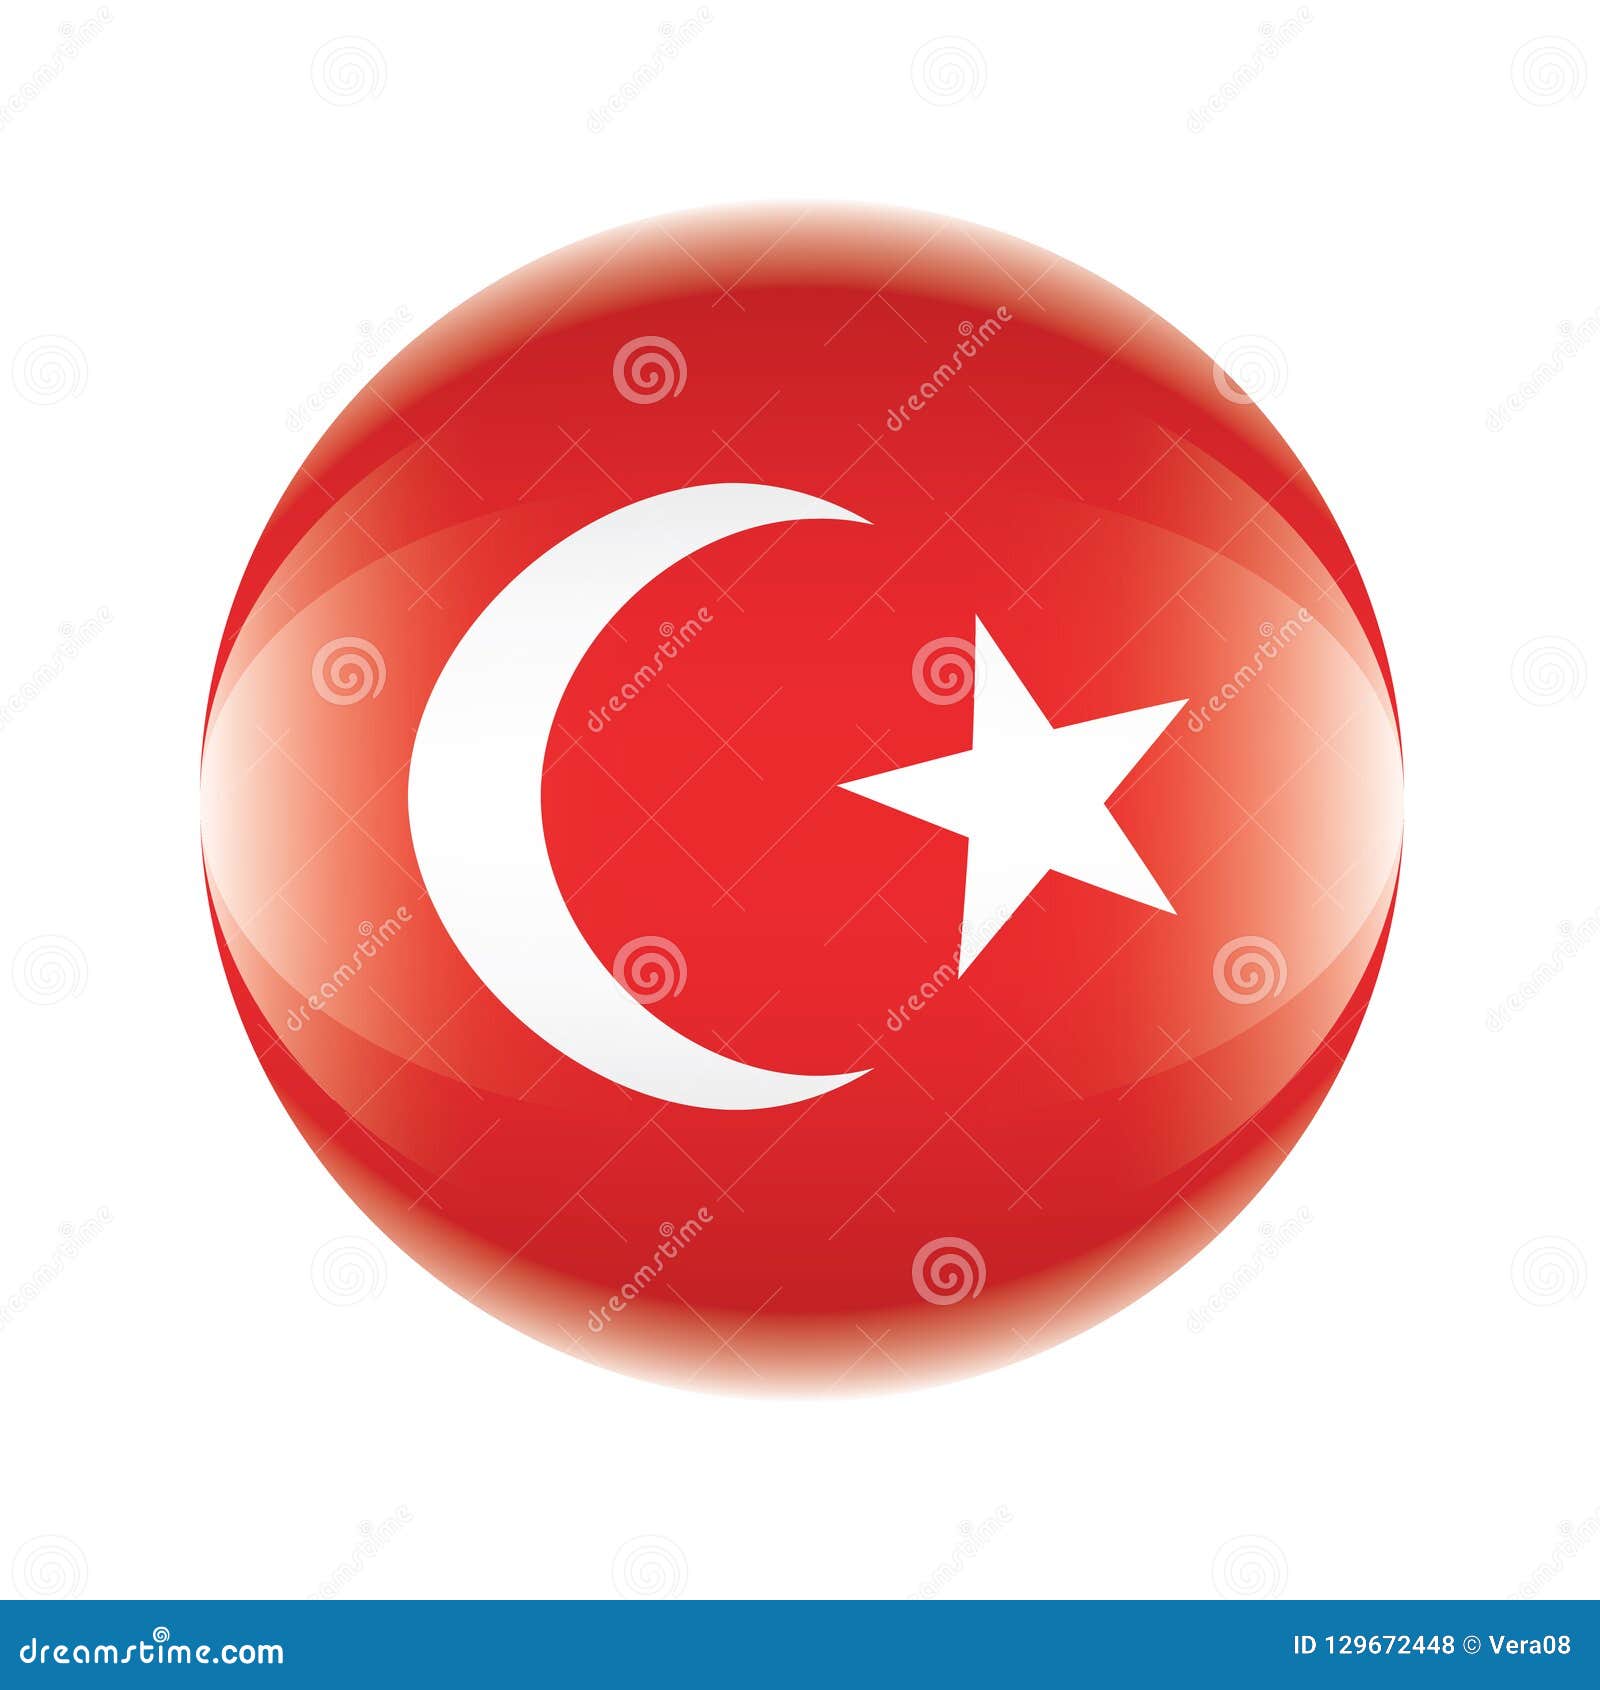 Download Turkey Flag Icon In The Form Of A Ball. Vector Eps 10 ...